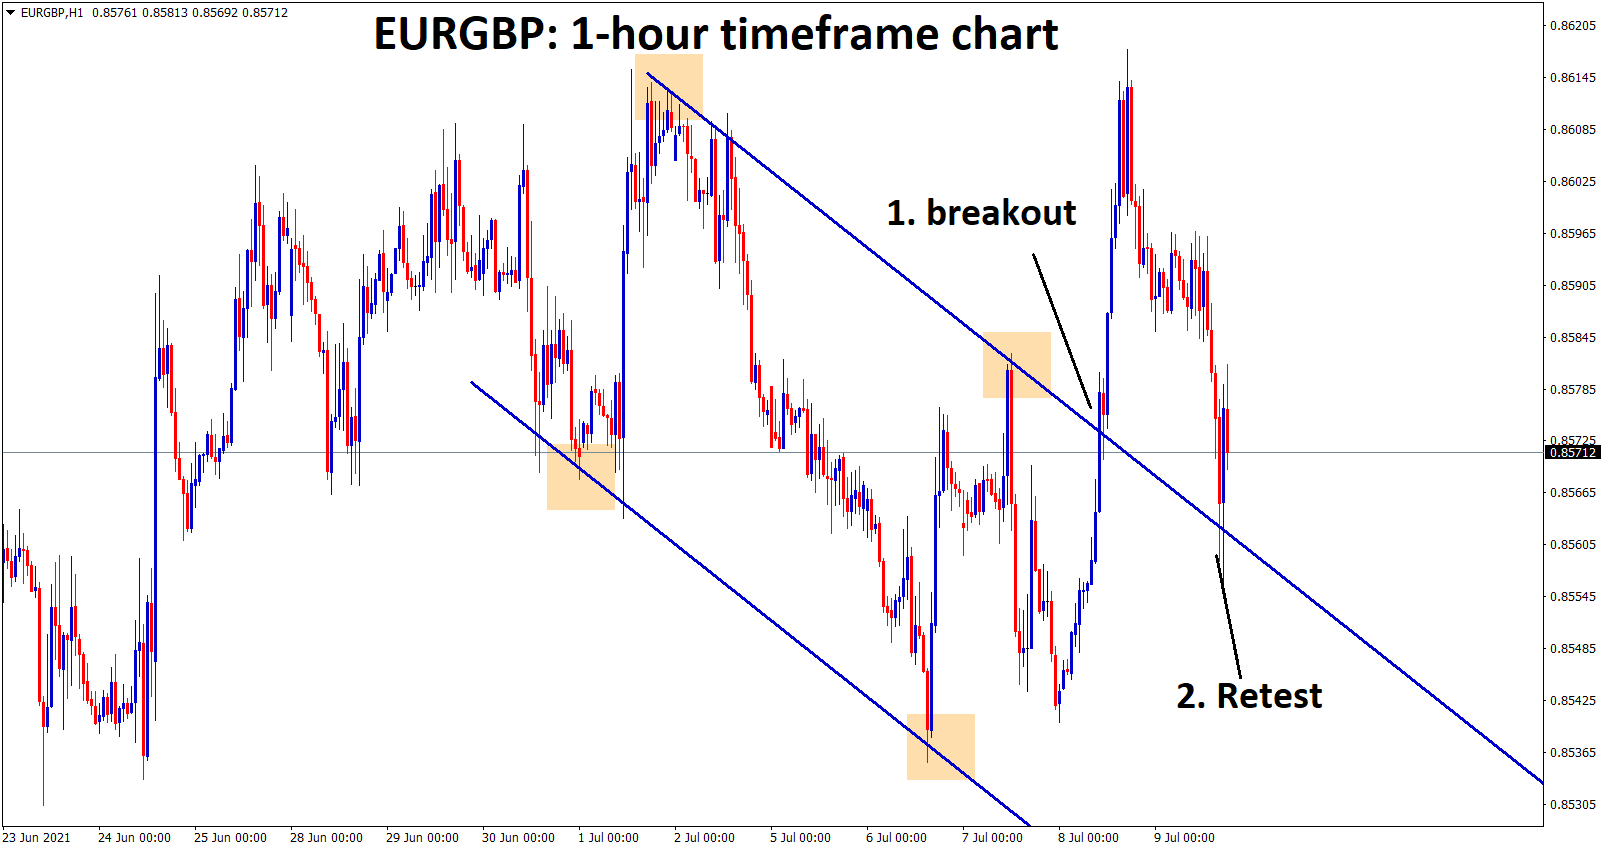 EURGBP has retested the broken level of the descending channel